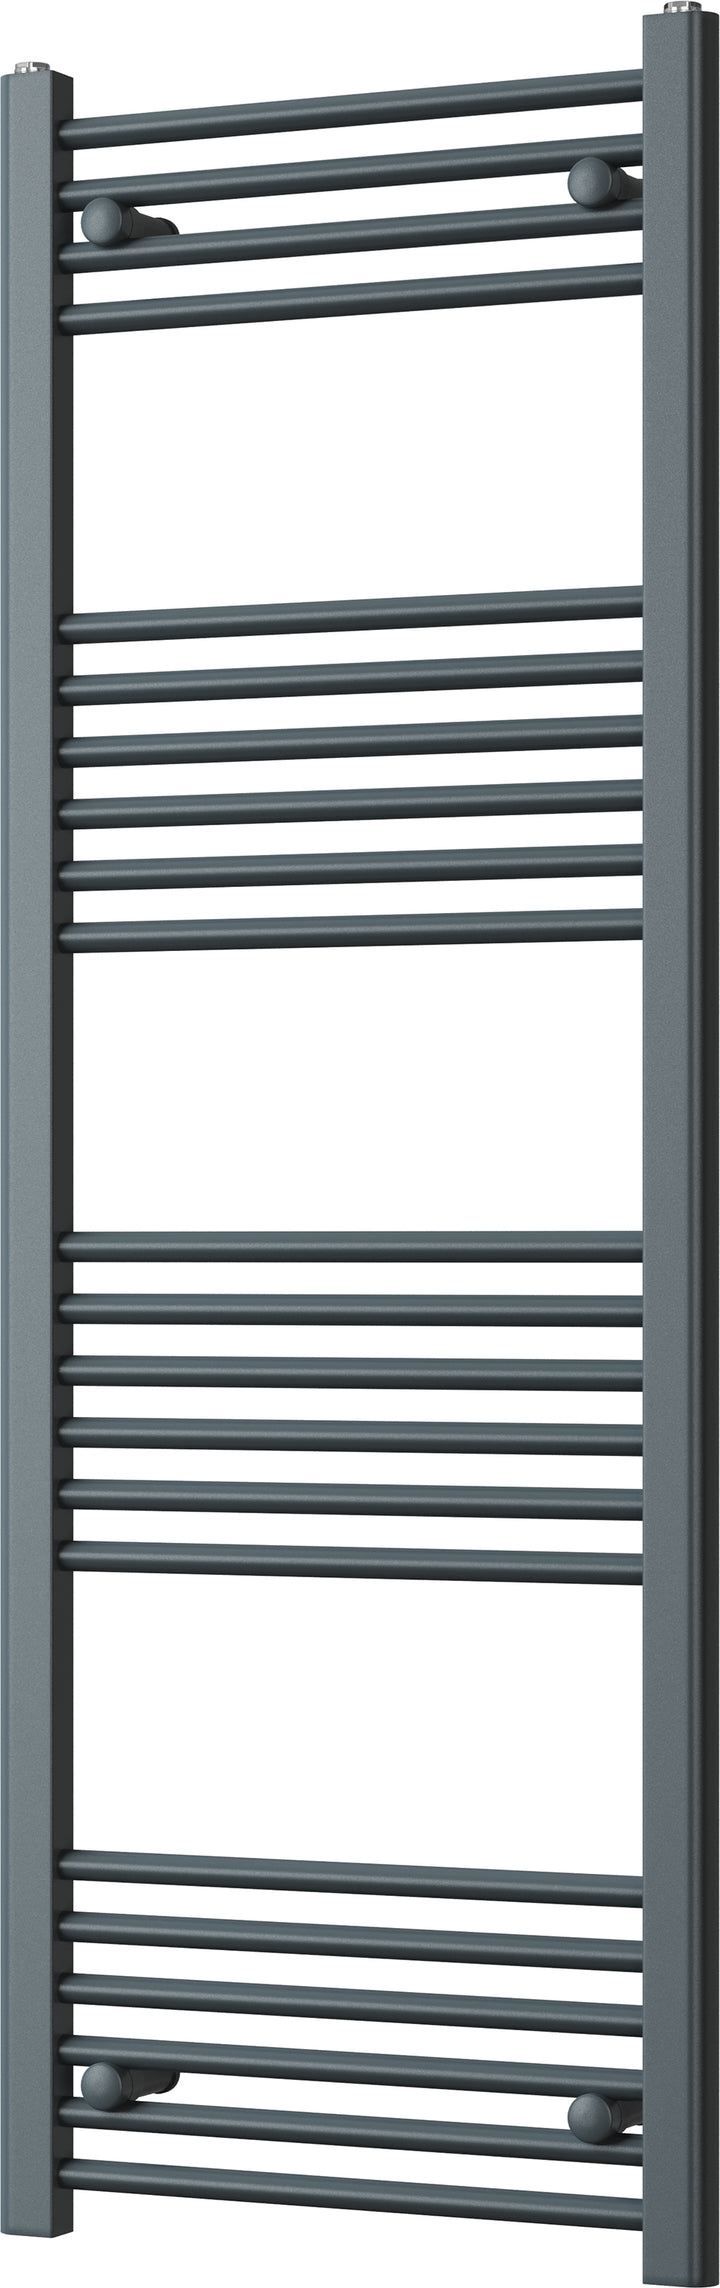 Zennor - Anthracite Heated Towel Rail - H1400mm x W500mm - Straight